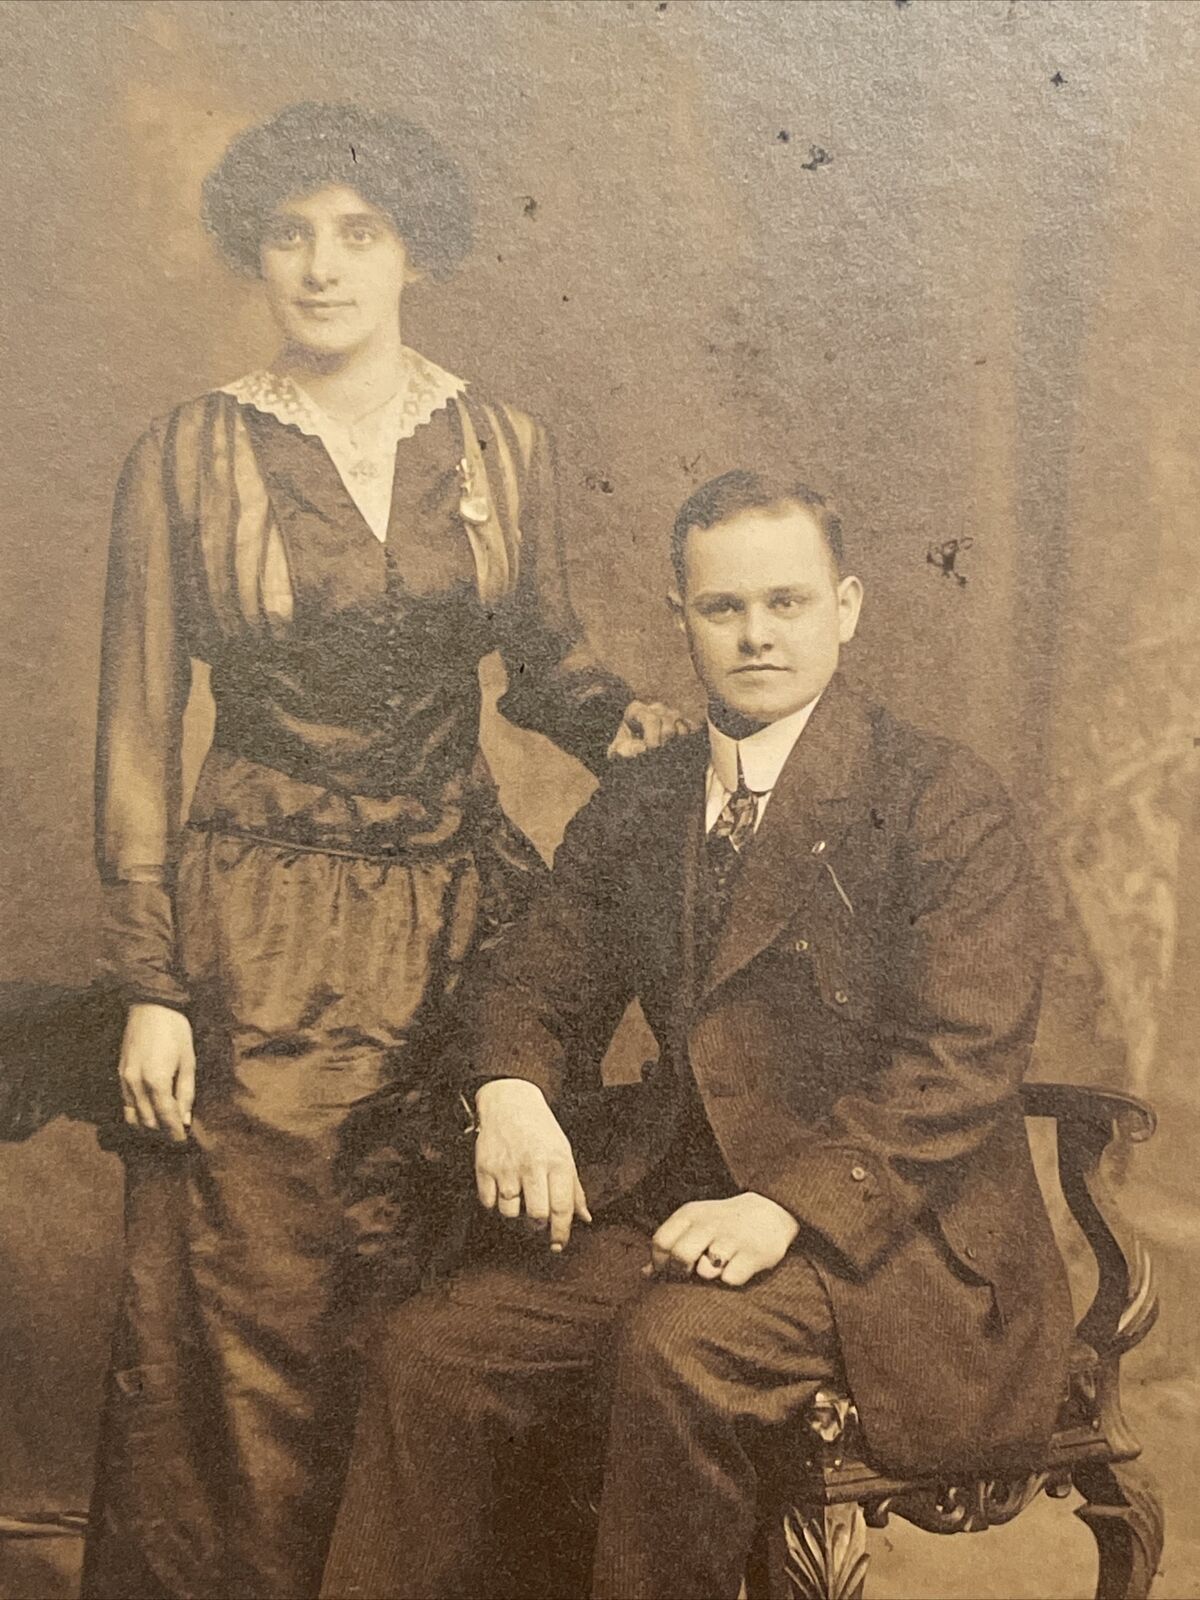 VINTAGE CABINET CARD BY THE STRUNK STUDIO - HANDSOME COUPLE - READING, PA. SEPIA